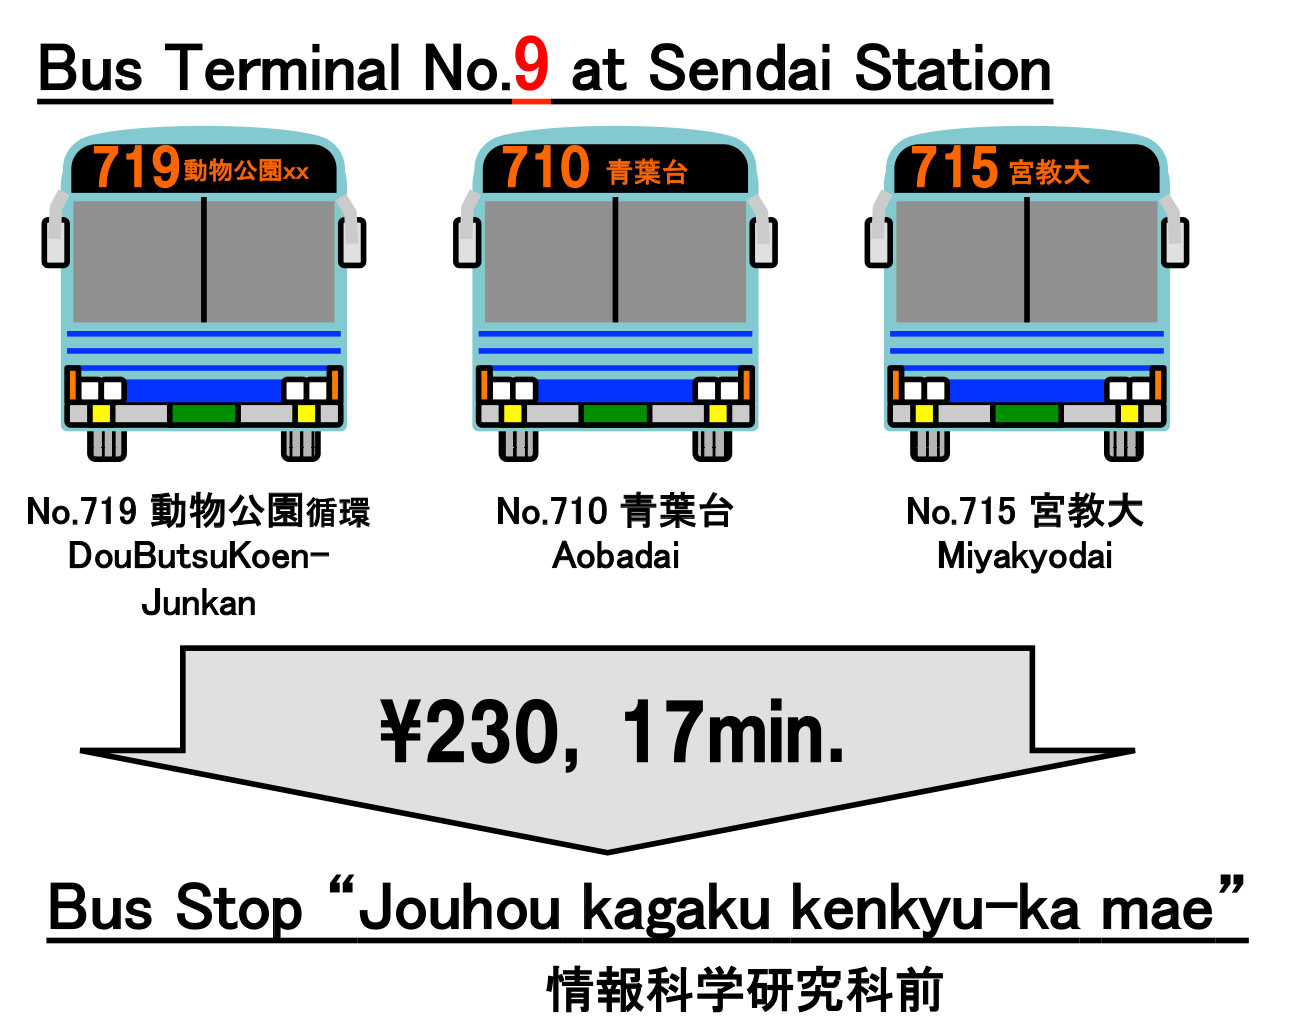 Buses from Sendai Station